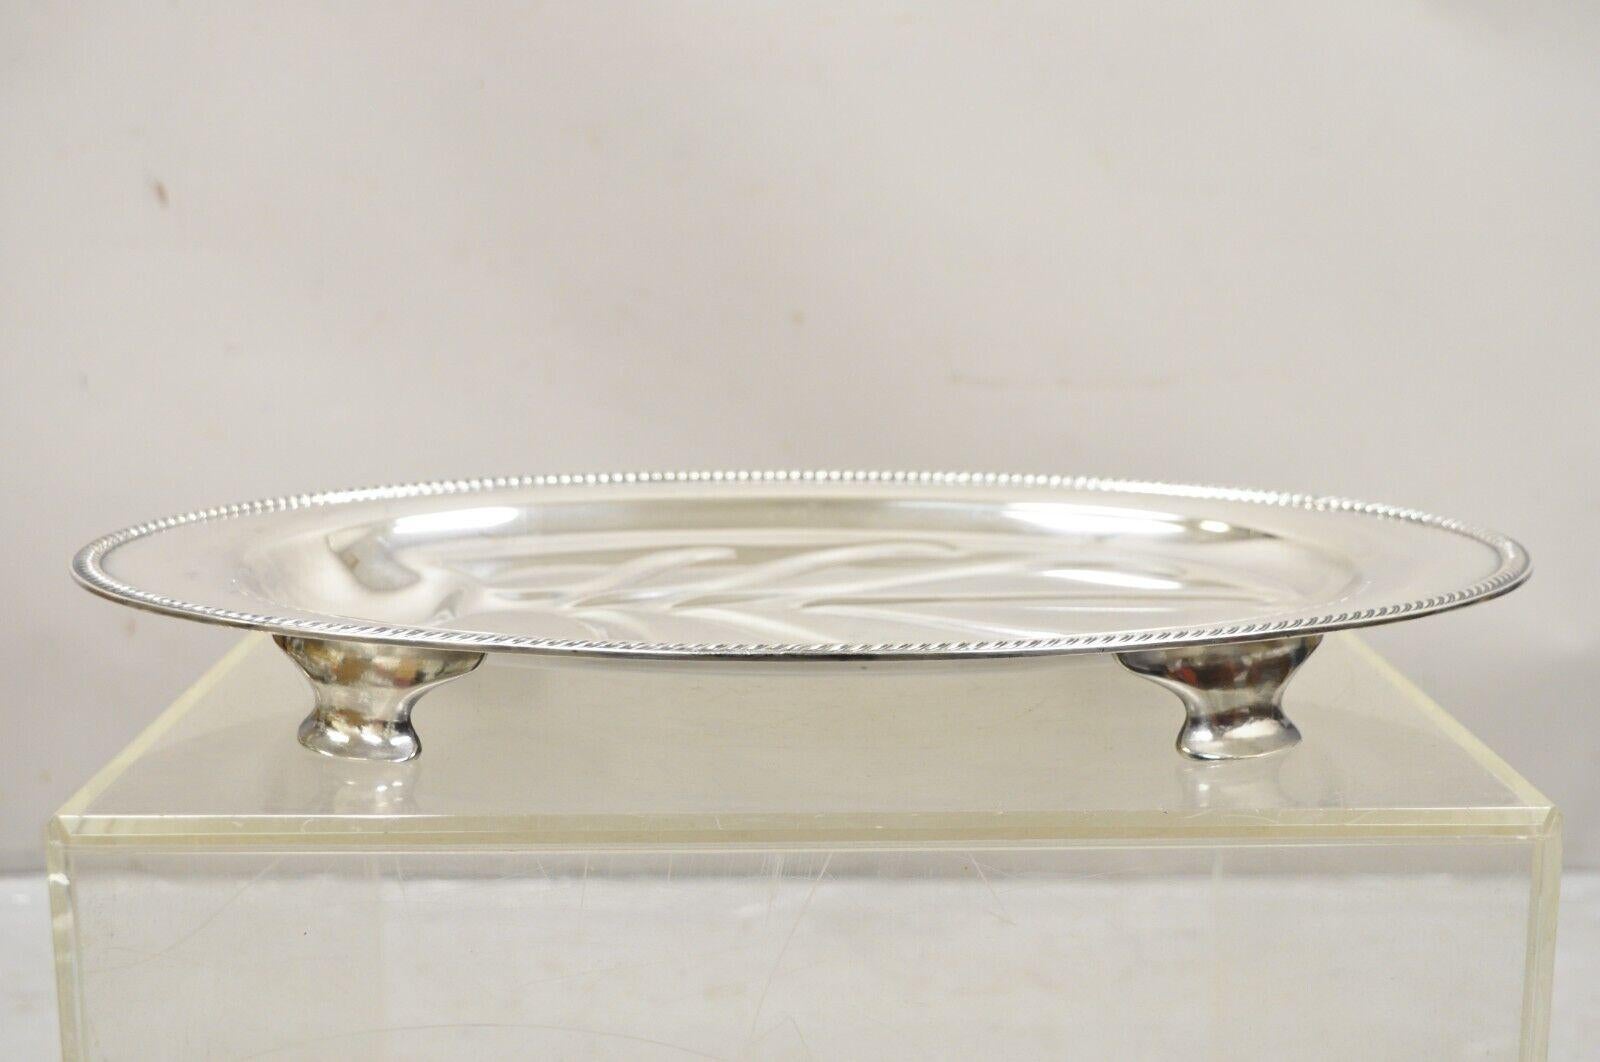 Vintage Community Plate English Regency Style Silver Plated Oval Meat Cutlery Serving Platter. Circa Mitte des 20. Jahrhunderts.
Abmessungen: 2